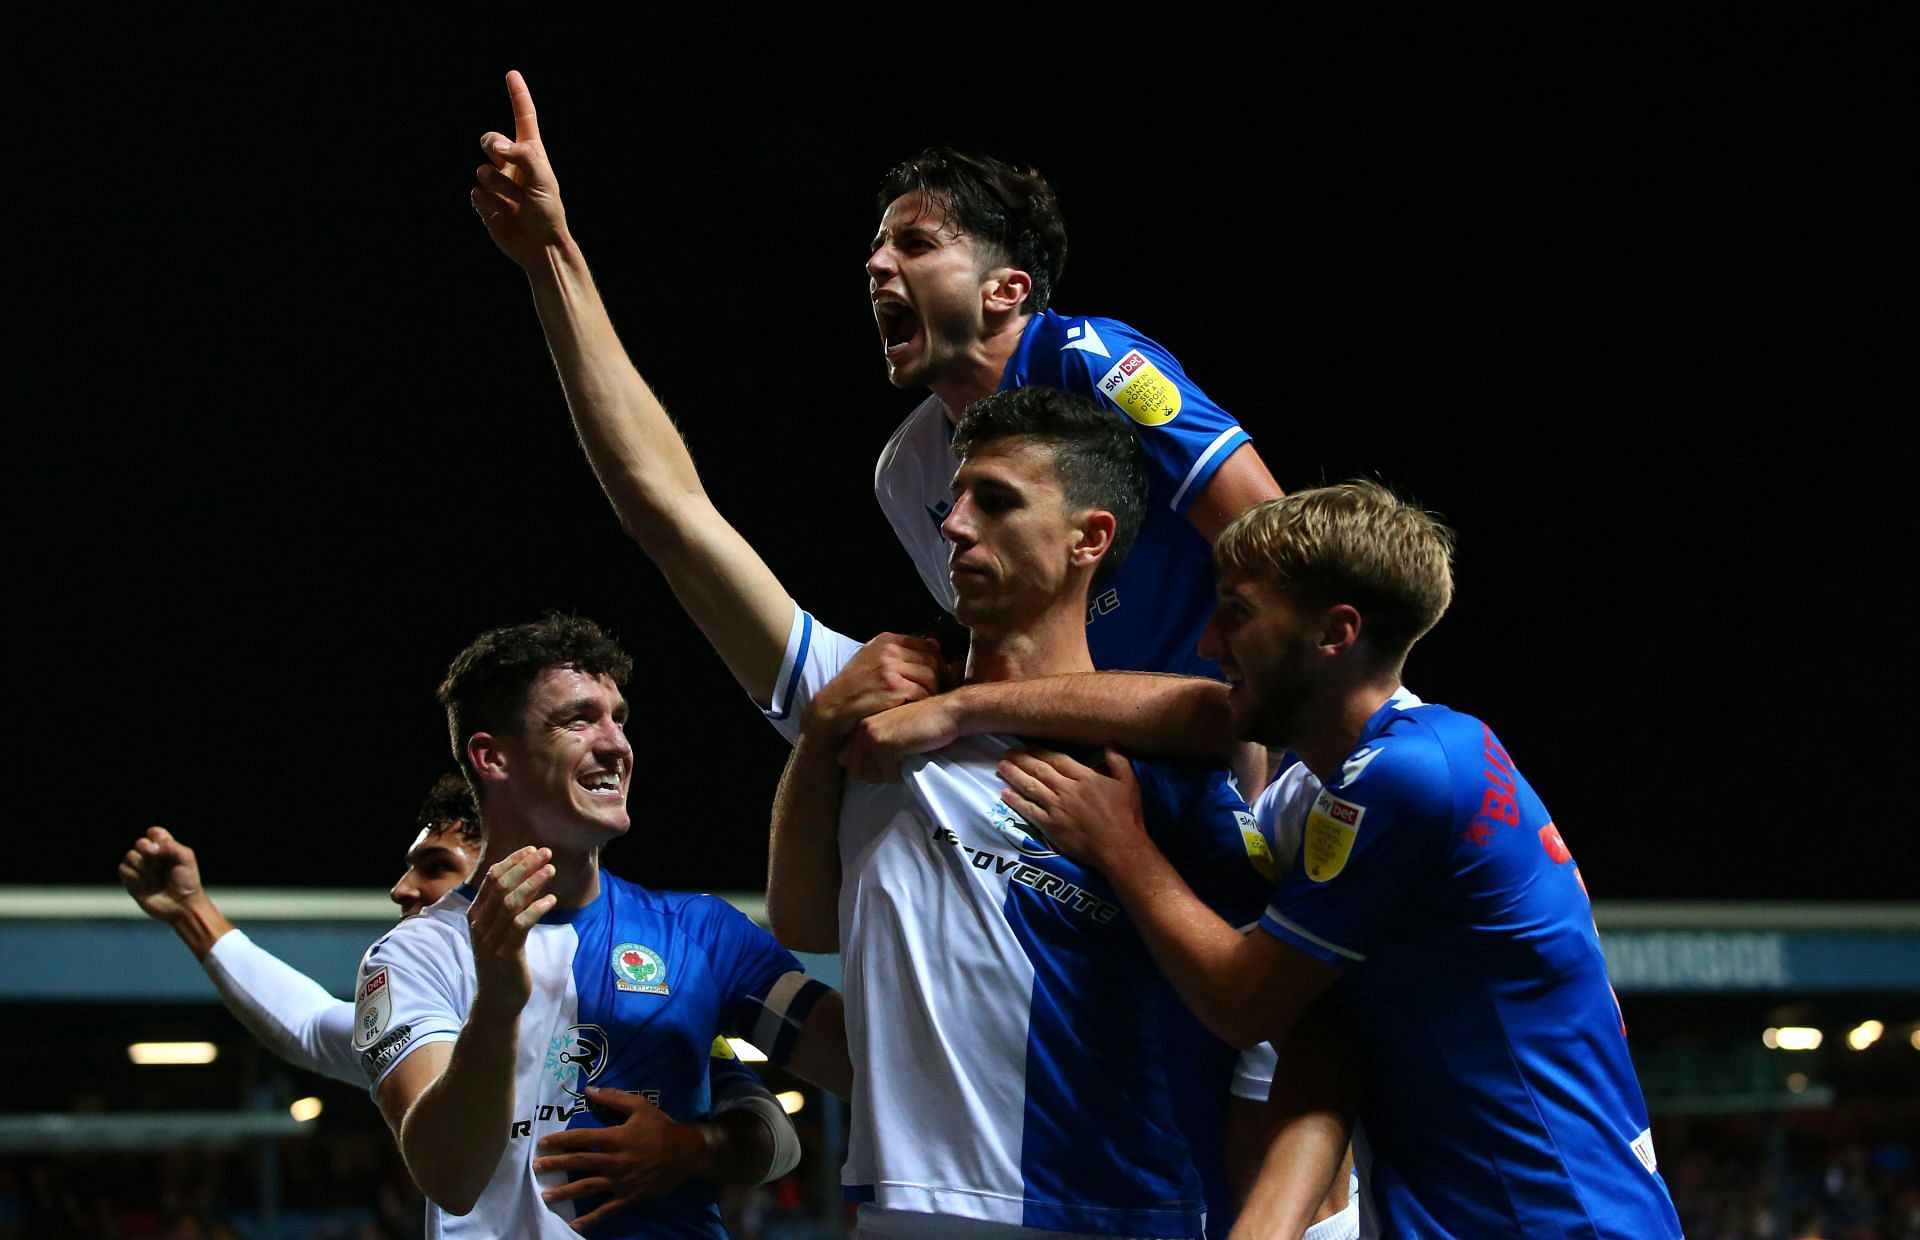 Blackburn Rovers will face Derby County on Saturday